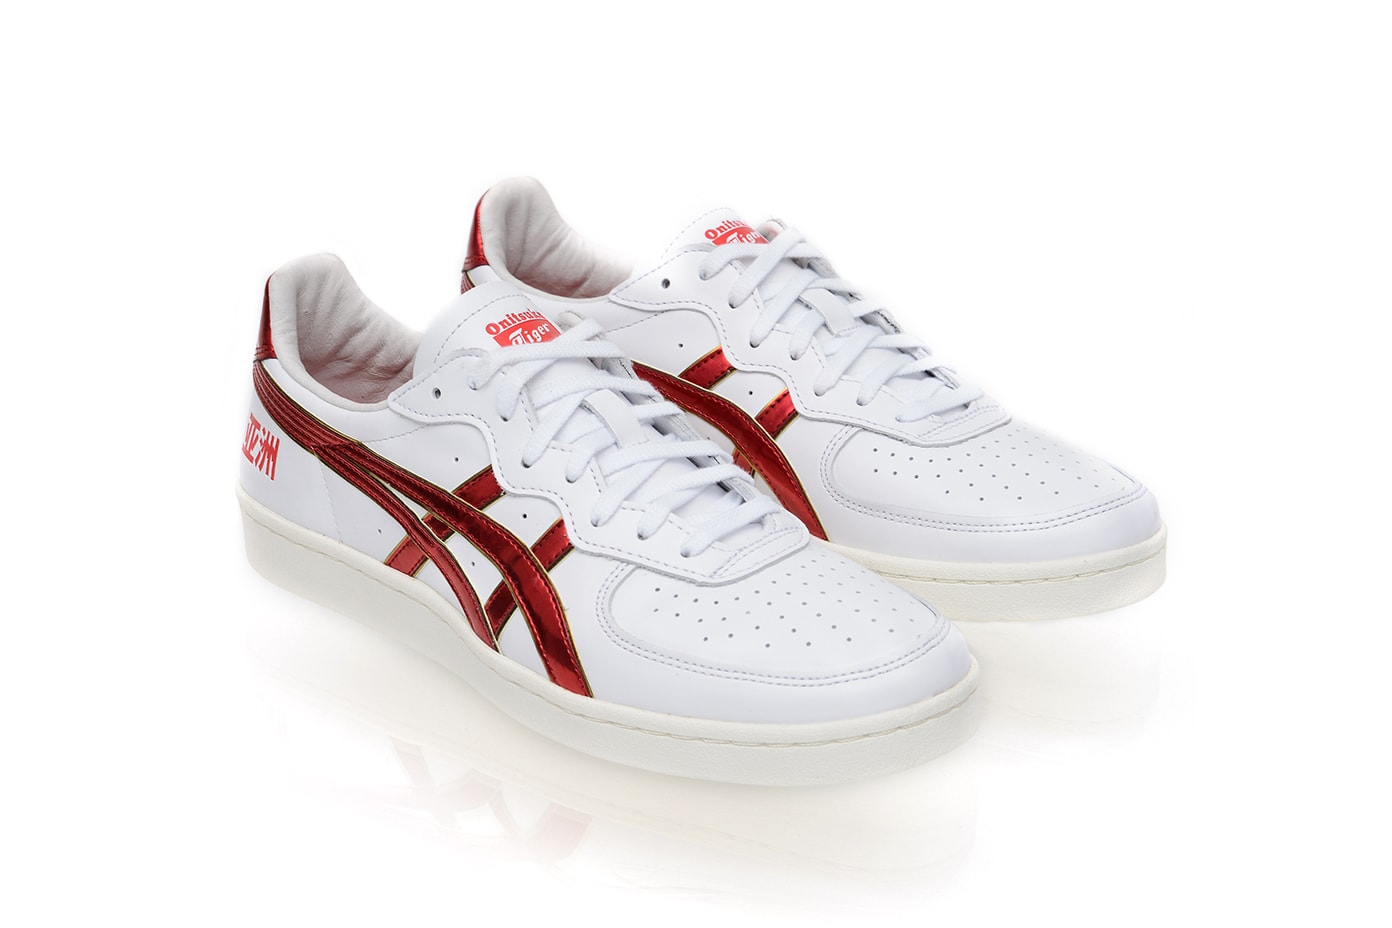 SANKUANZ 2018 Fall Winter footwear collection onitsuka tiger collaboration